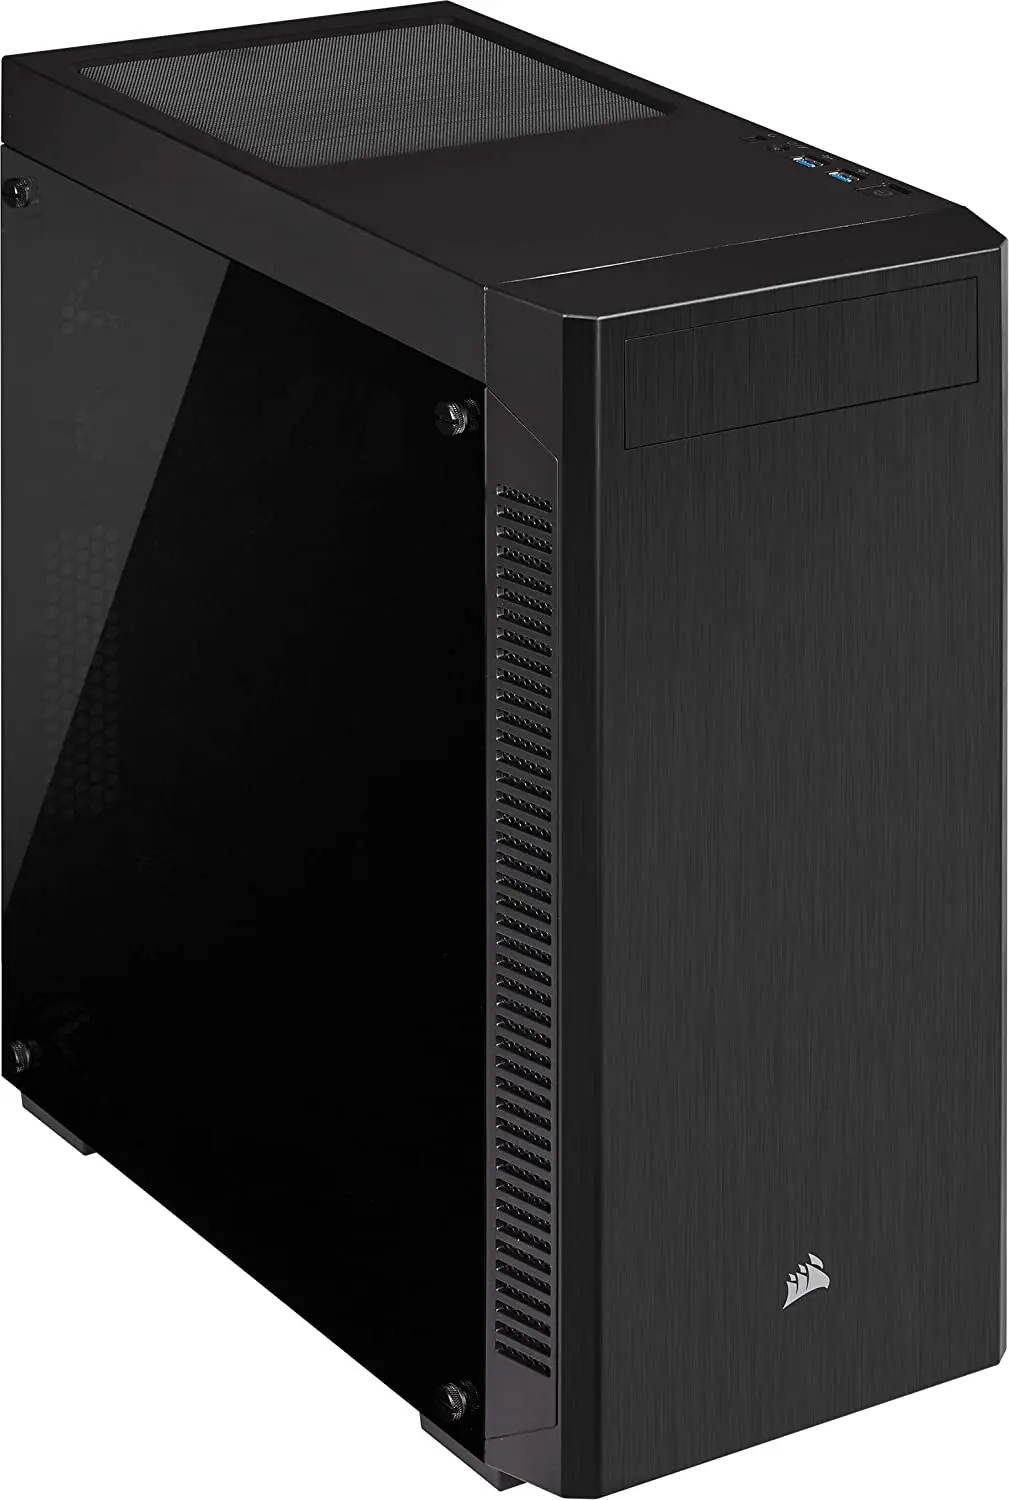 

Corsair Cc 9011183 Ww Tamperli Mid Tower Black, Tempered Glass Side Panel Mid Tower Computer case, 2021, fast Shipping, In Stock